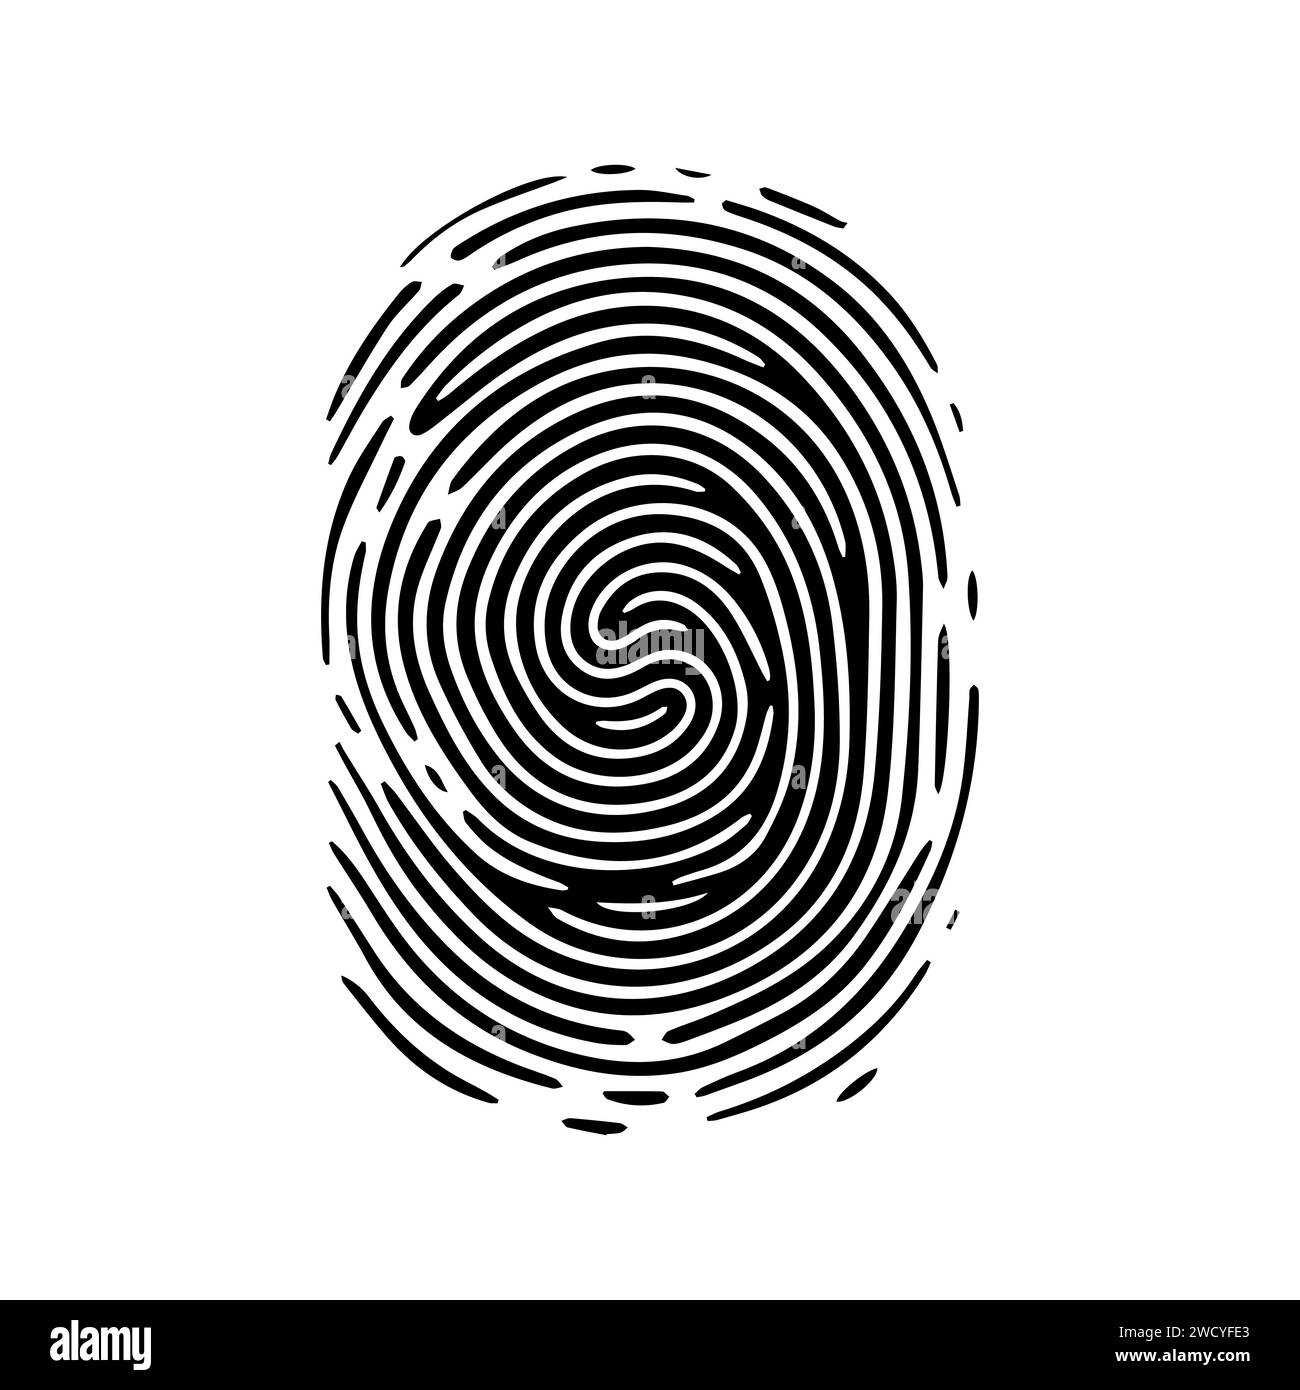 Fingerprint pattern, clear lines and swirls. Human thumbprint. Icon, pictogram, logo. Vector isolated on a white background. Security concept. Black and white illustration Stock Vector